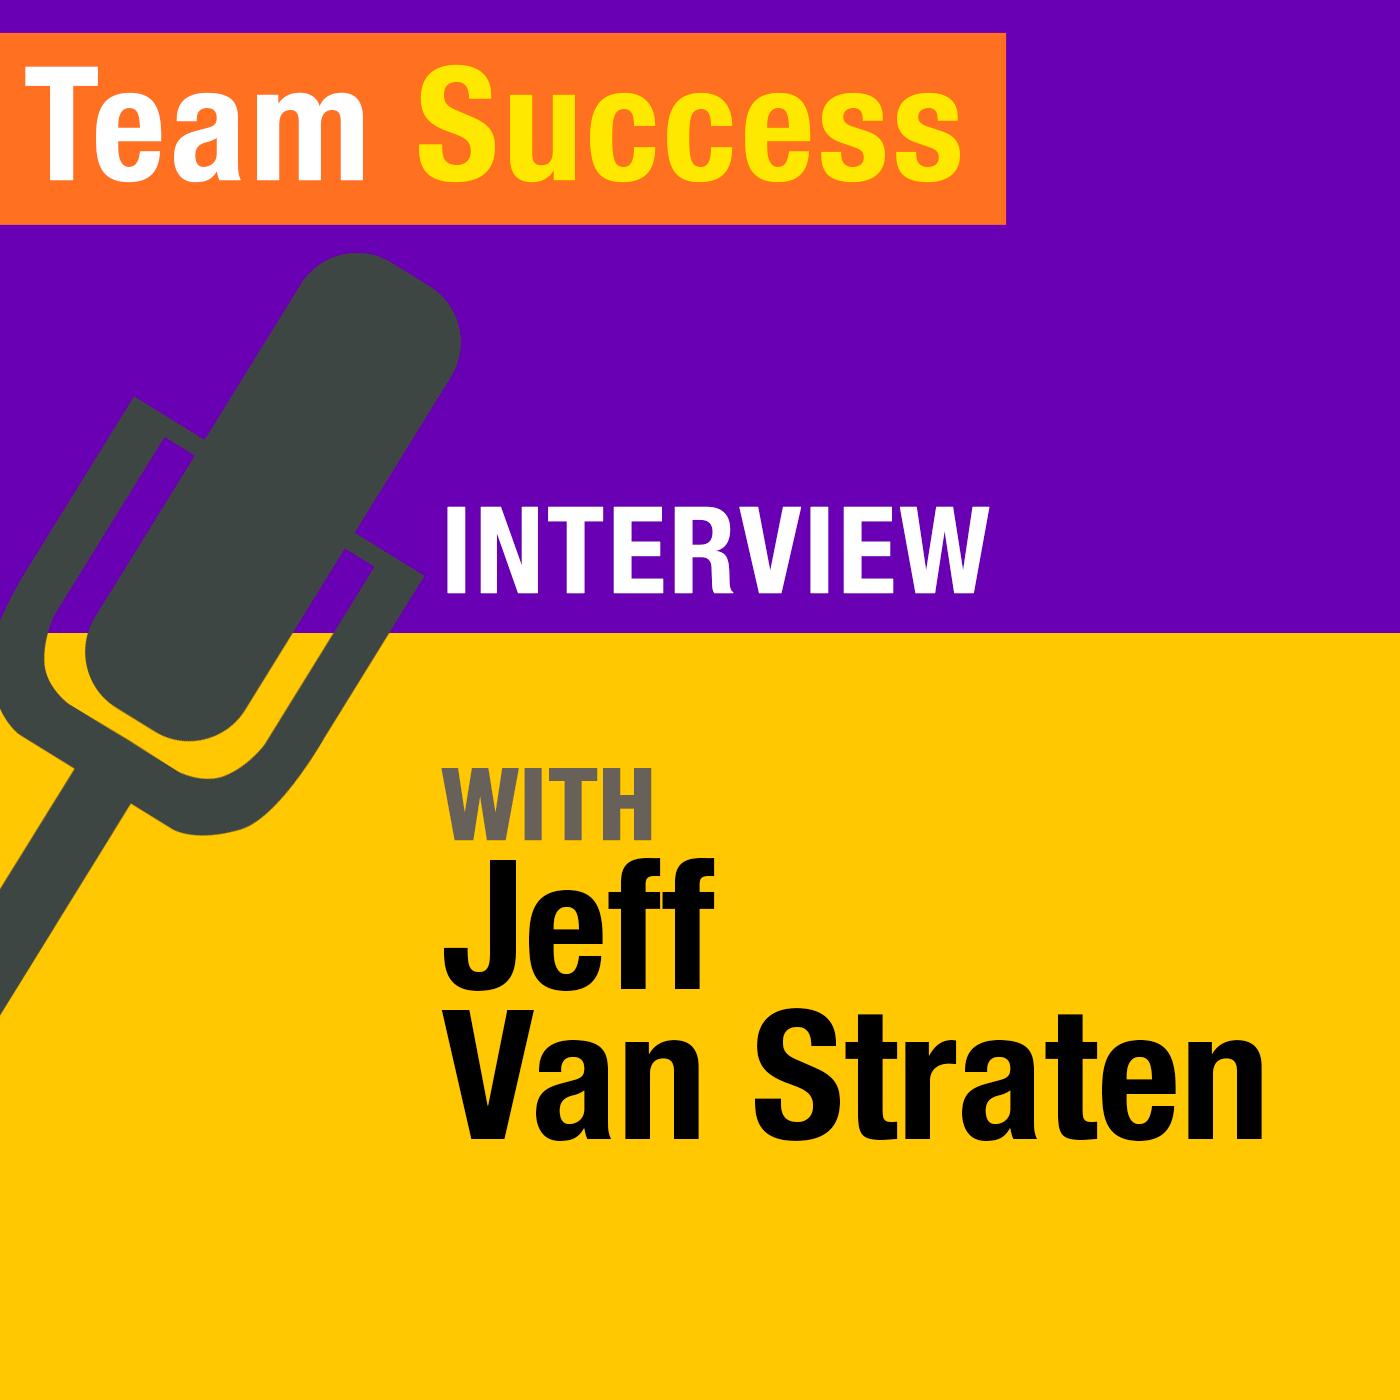 An Interview With Jeff Van Straten: An Entrepreneur’s Experience Of Using “Multiplication By Subtraction”